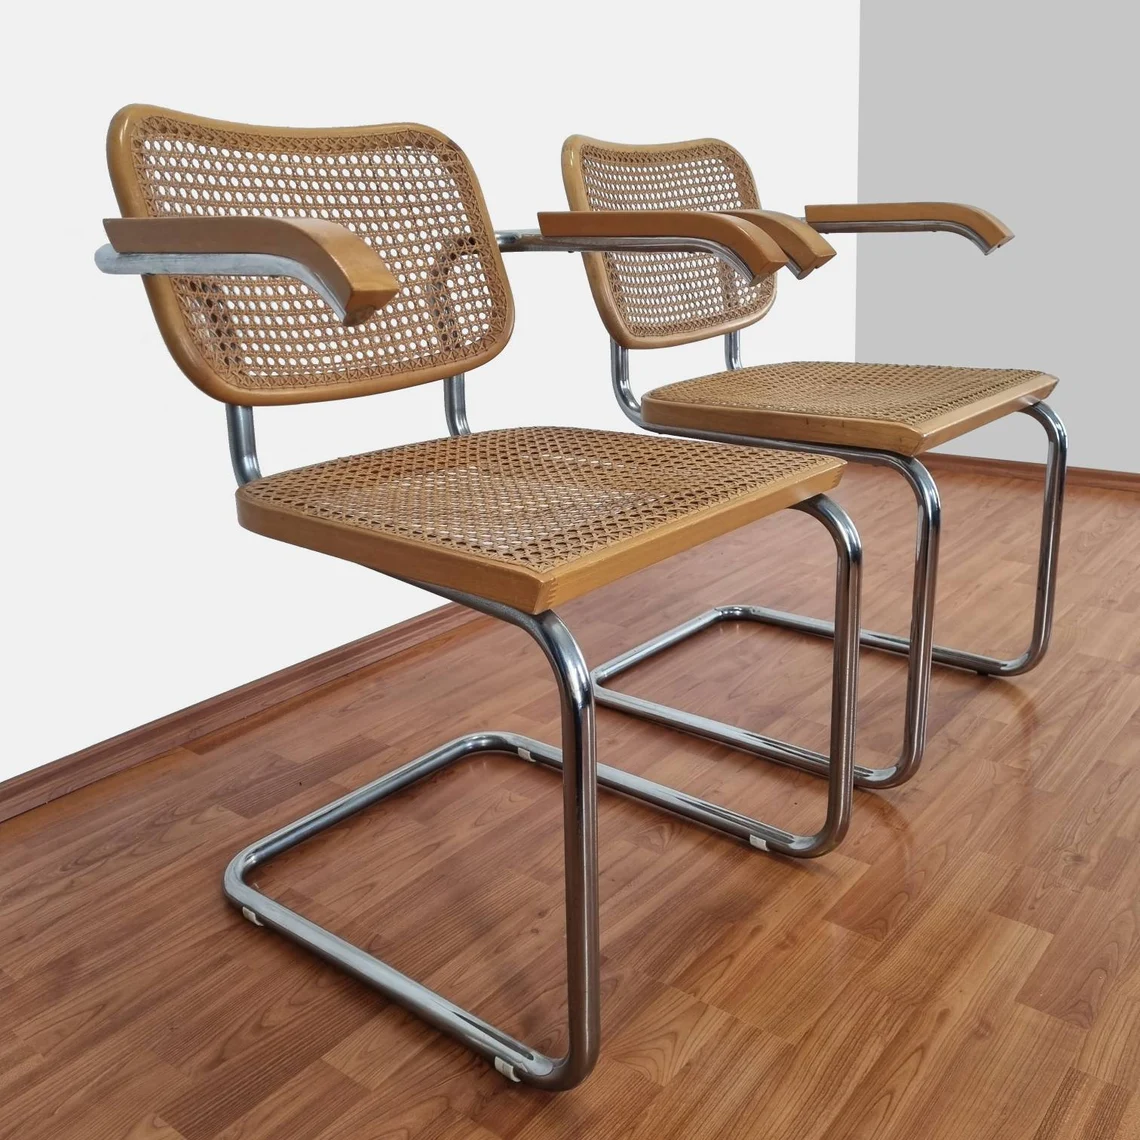 Pair of Vintage Marcel Breuer B64 Chairs, Cesca Chairs, Cantilever Chair, Italy, 70s